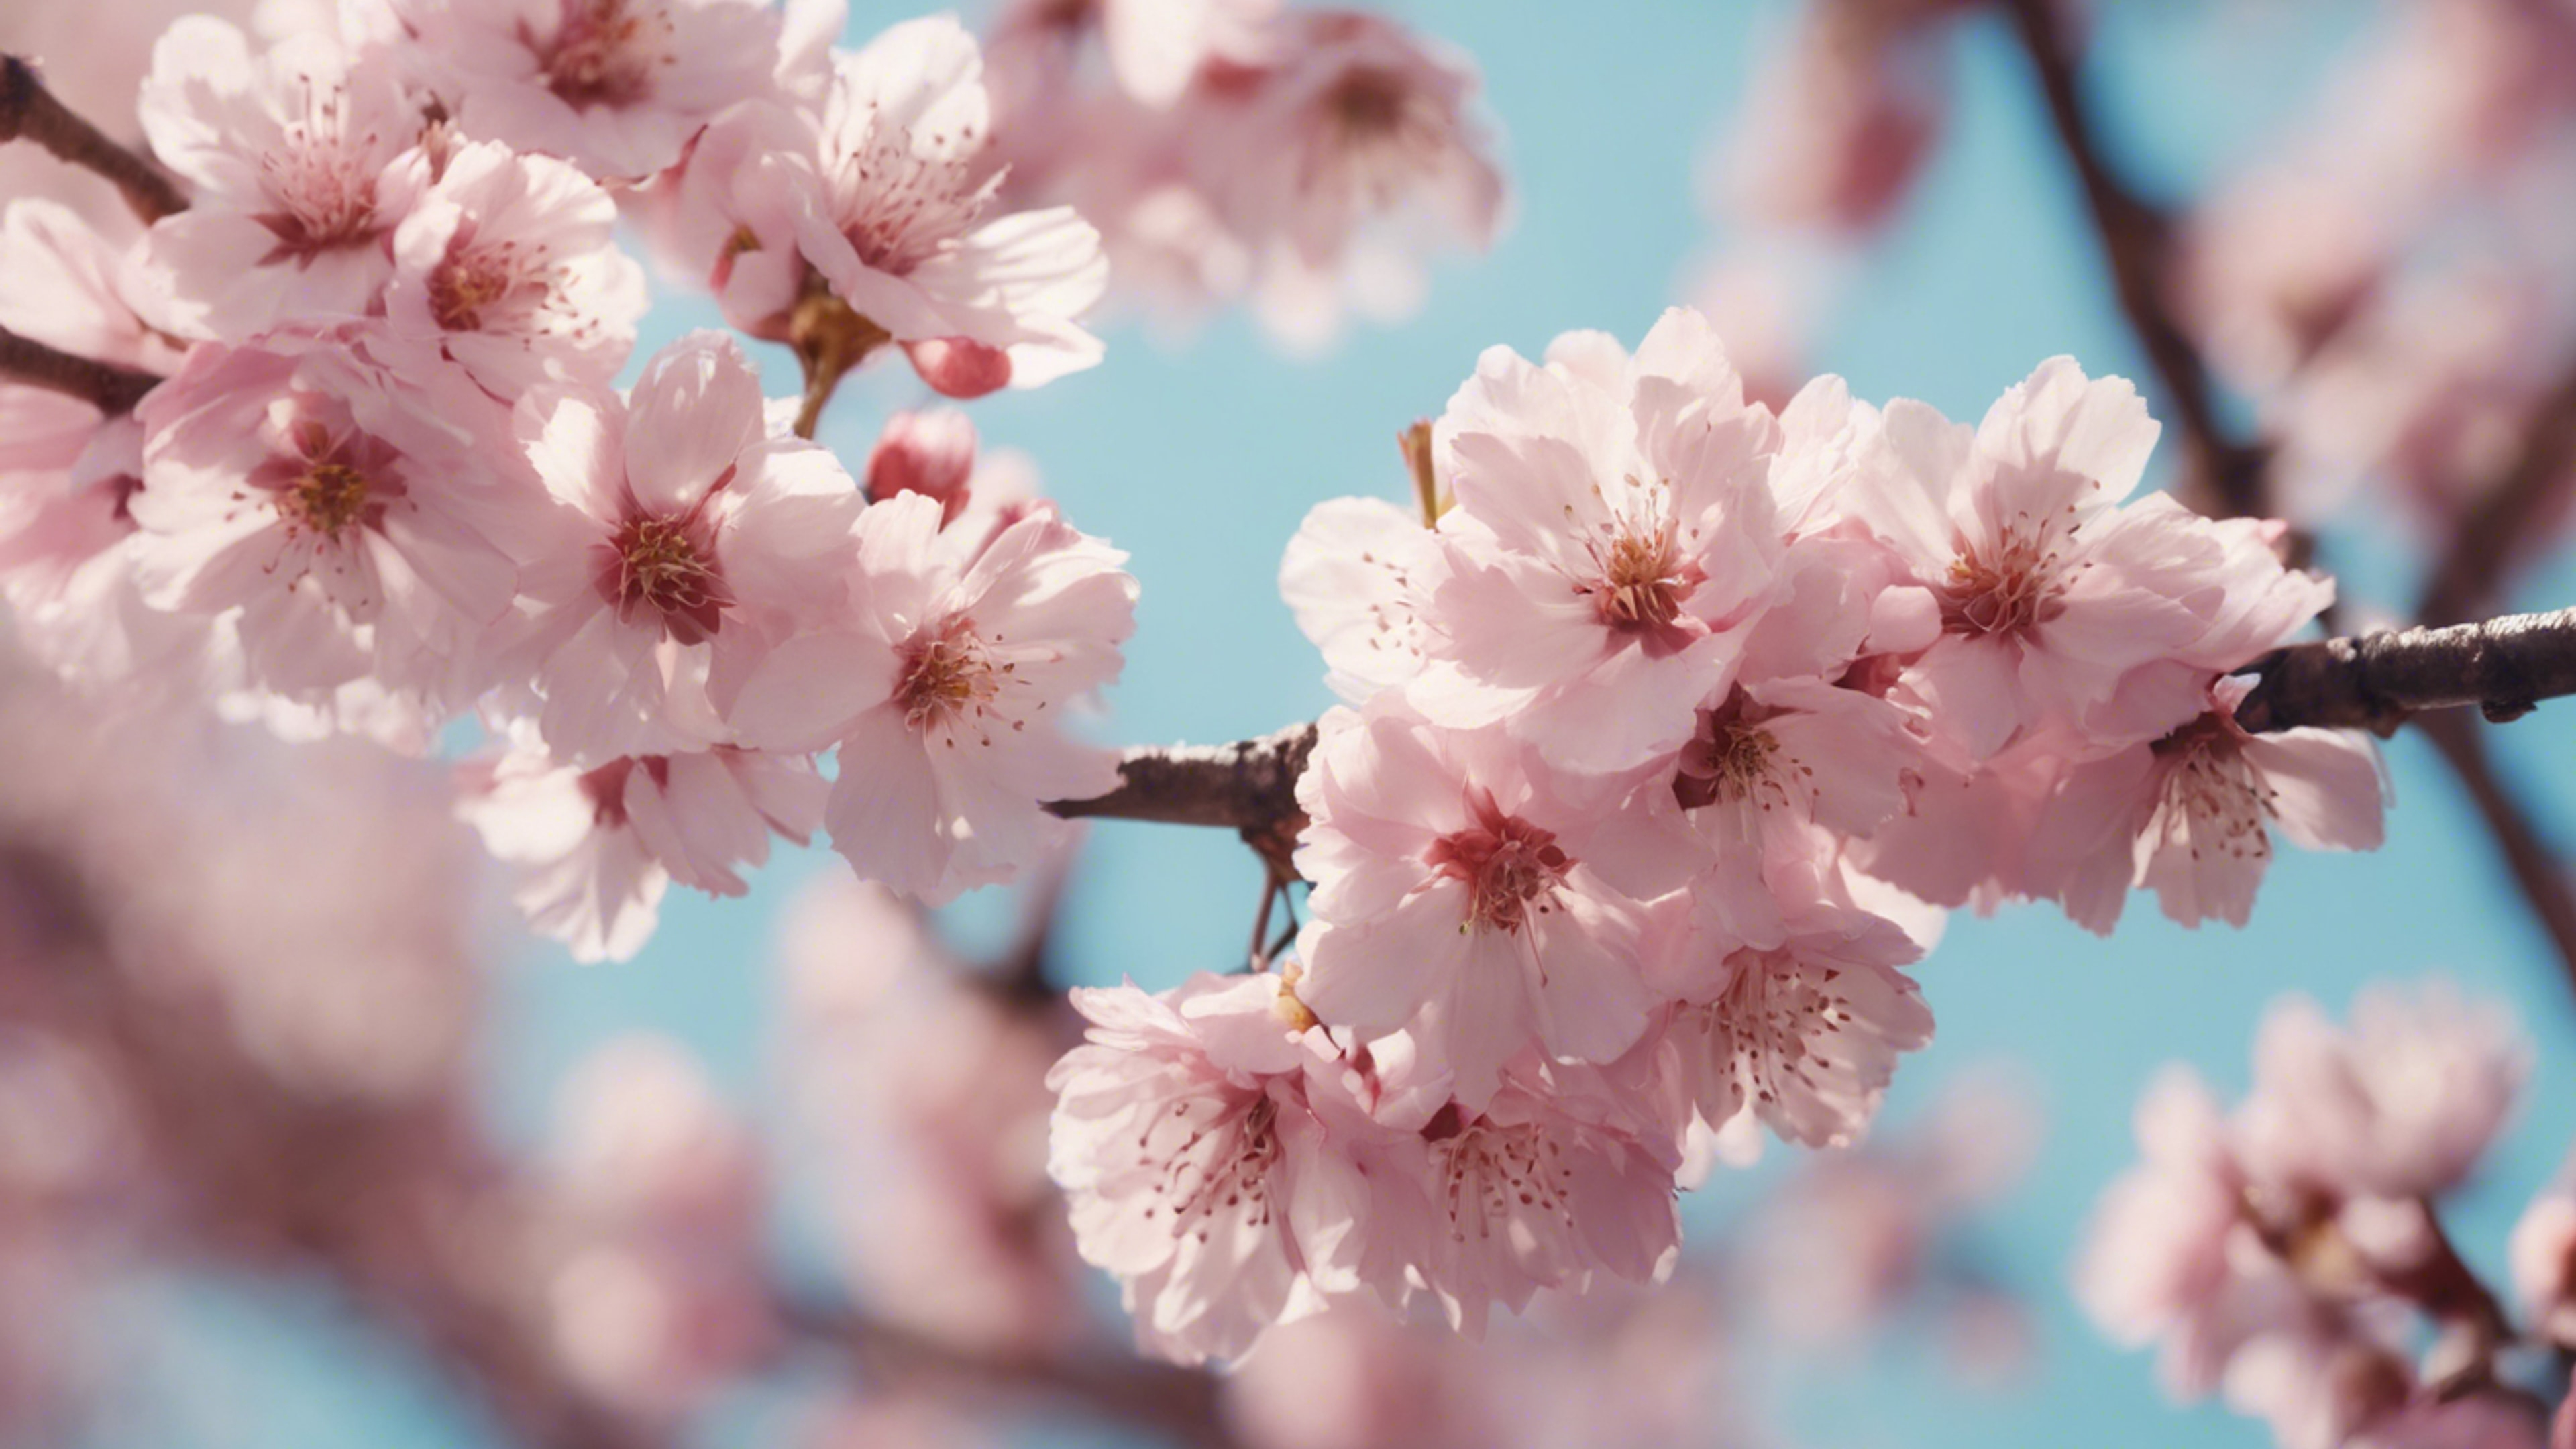 A vibrant scene of pastel pink cherry blossoms falling gently. 墙纸[c8bce7433f184c22a8f5]